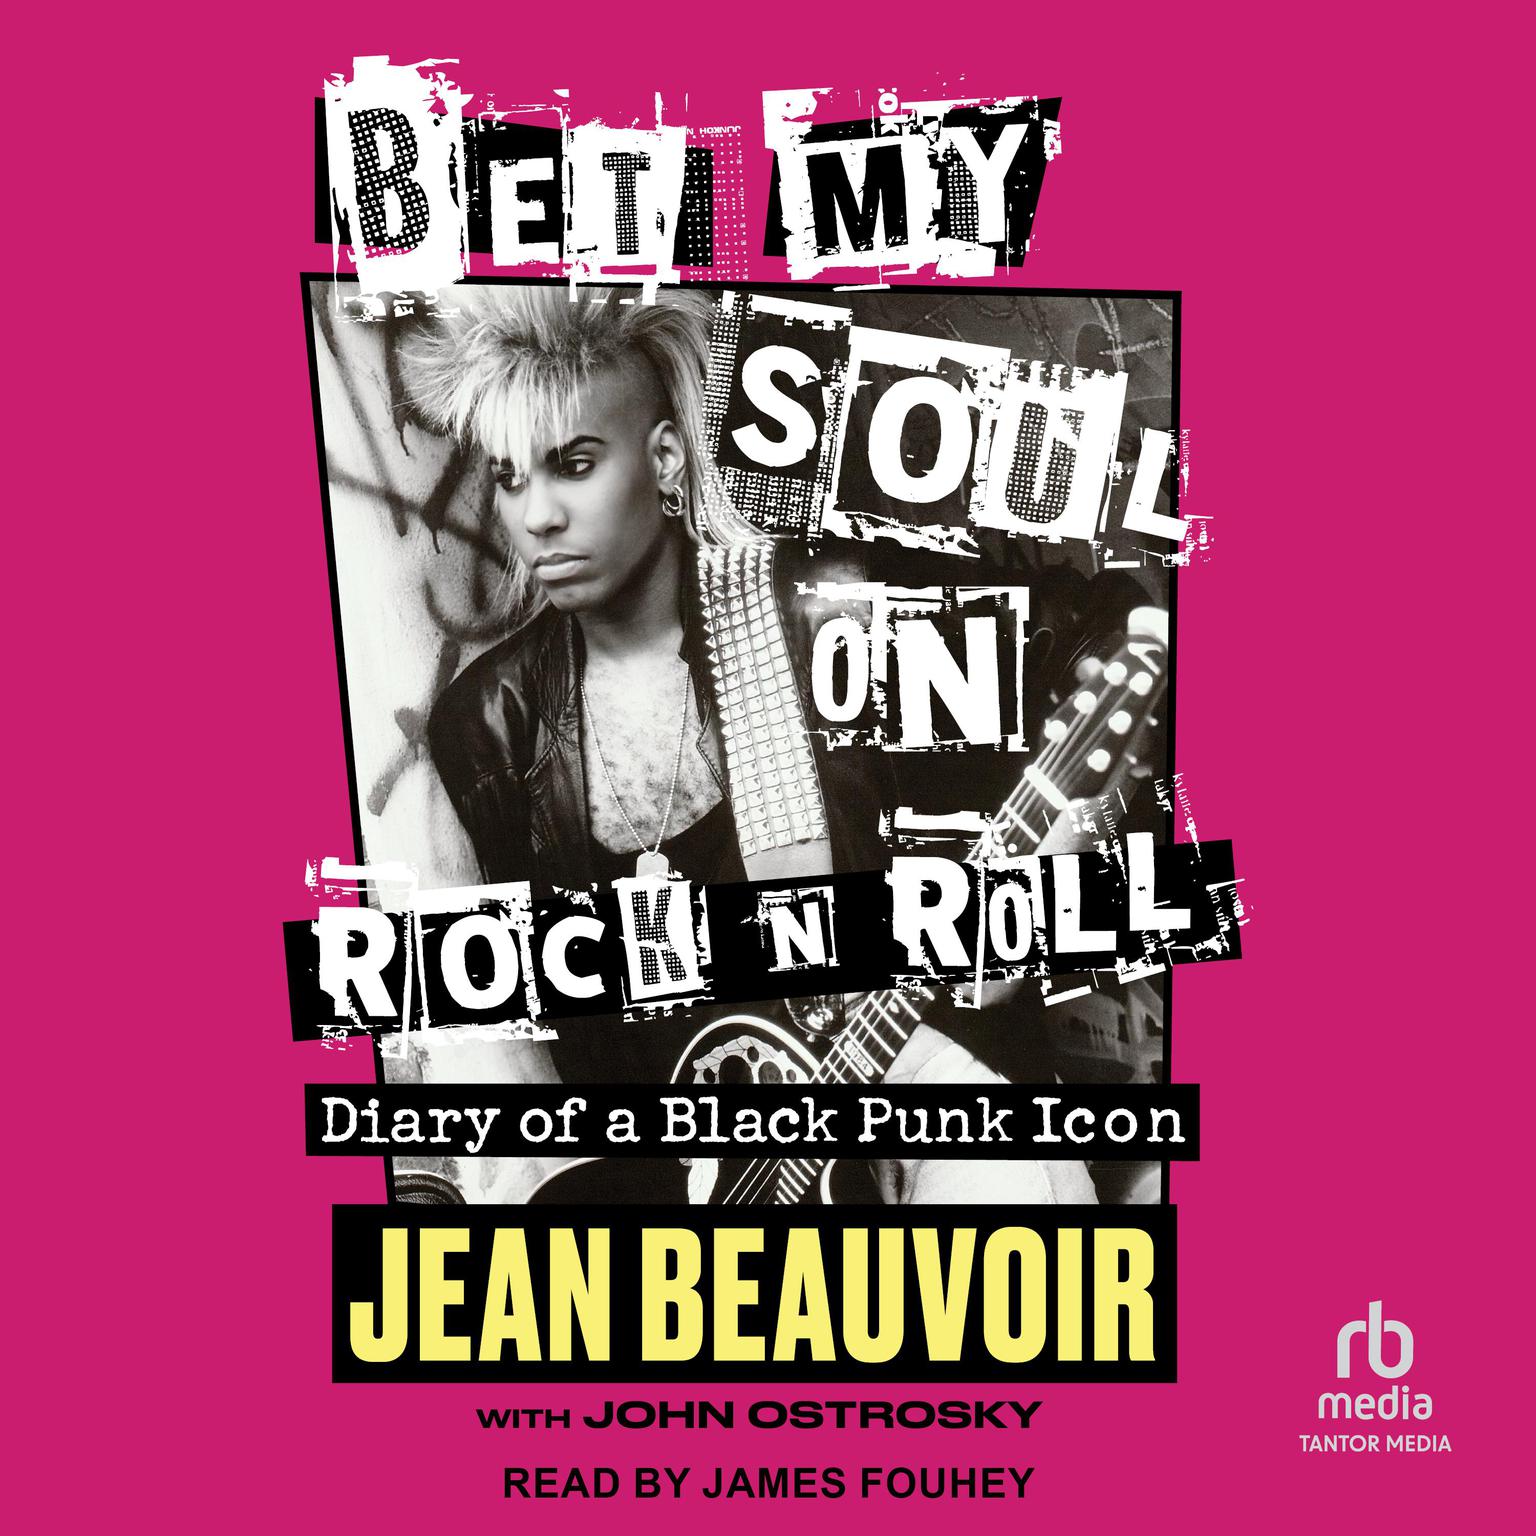 Bet My Soul on Rock n Roll: Diary of a Black Punk Icon Audiobook, by Jean Beauvoir